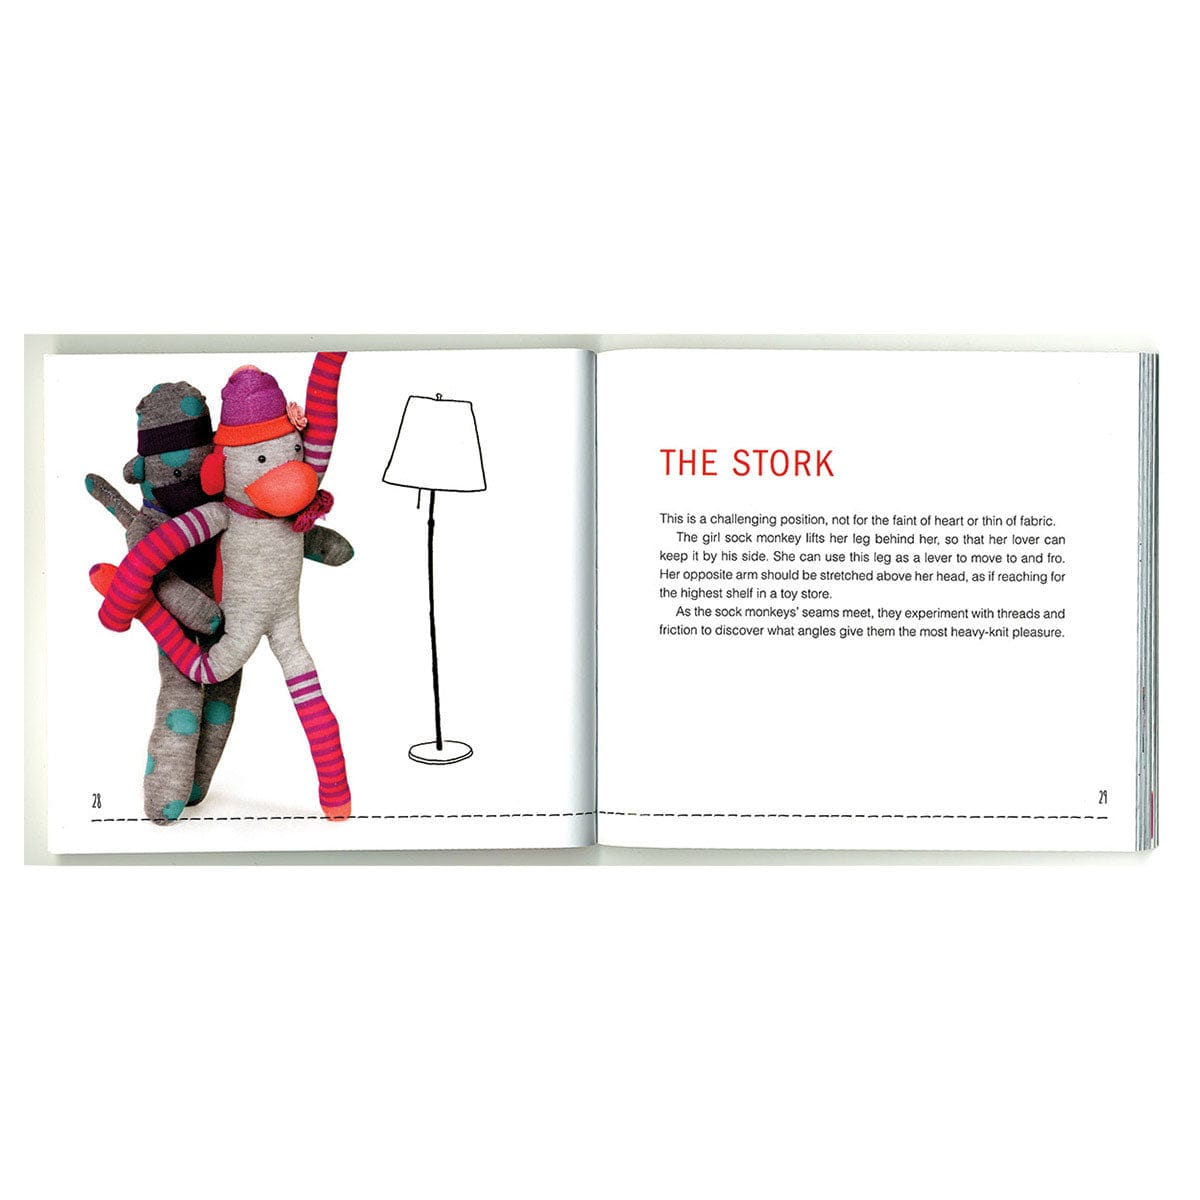 Sock Monkey Kama Sutra: Tantric Sex Positions for Your Naughty Little Monkey by Adams Media - rolik